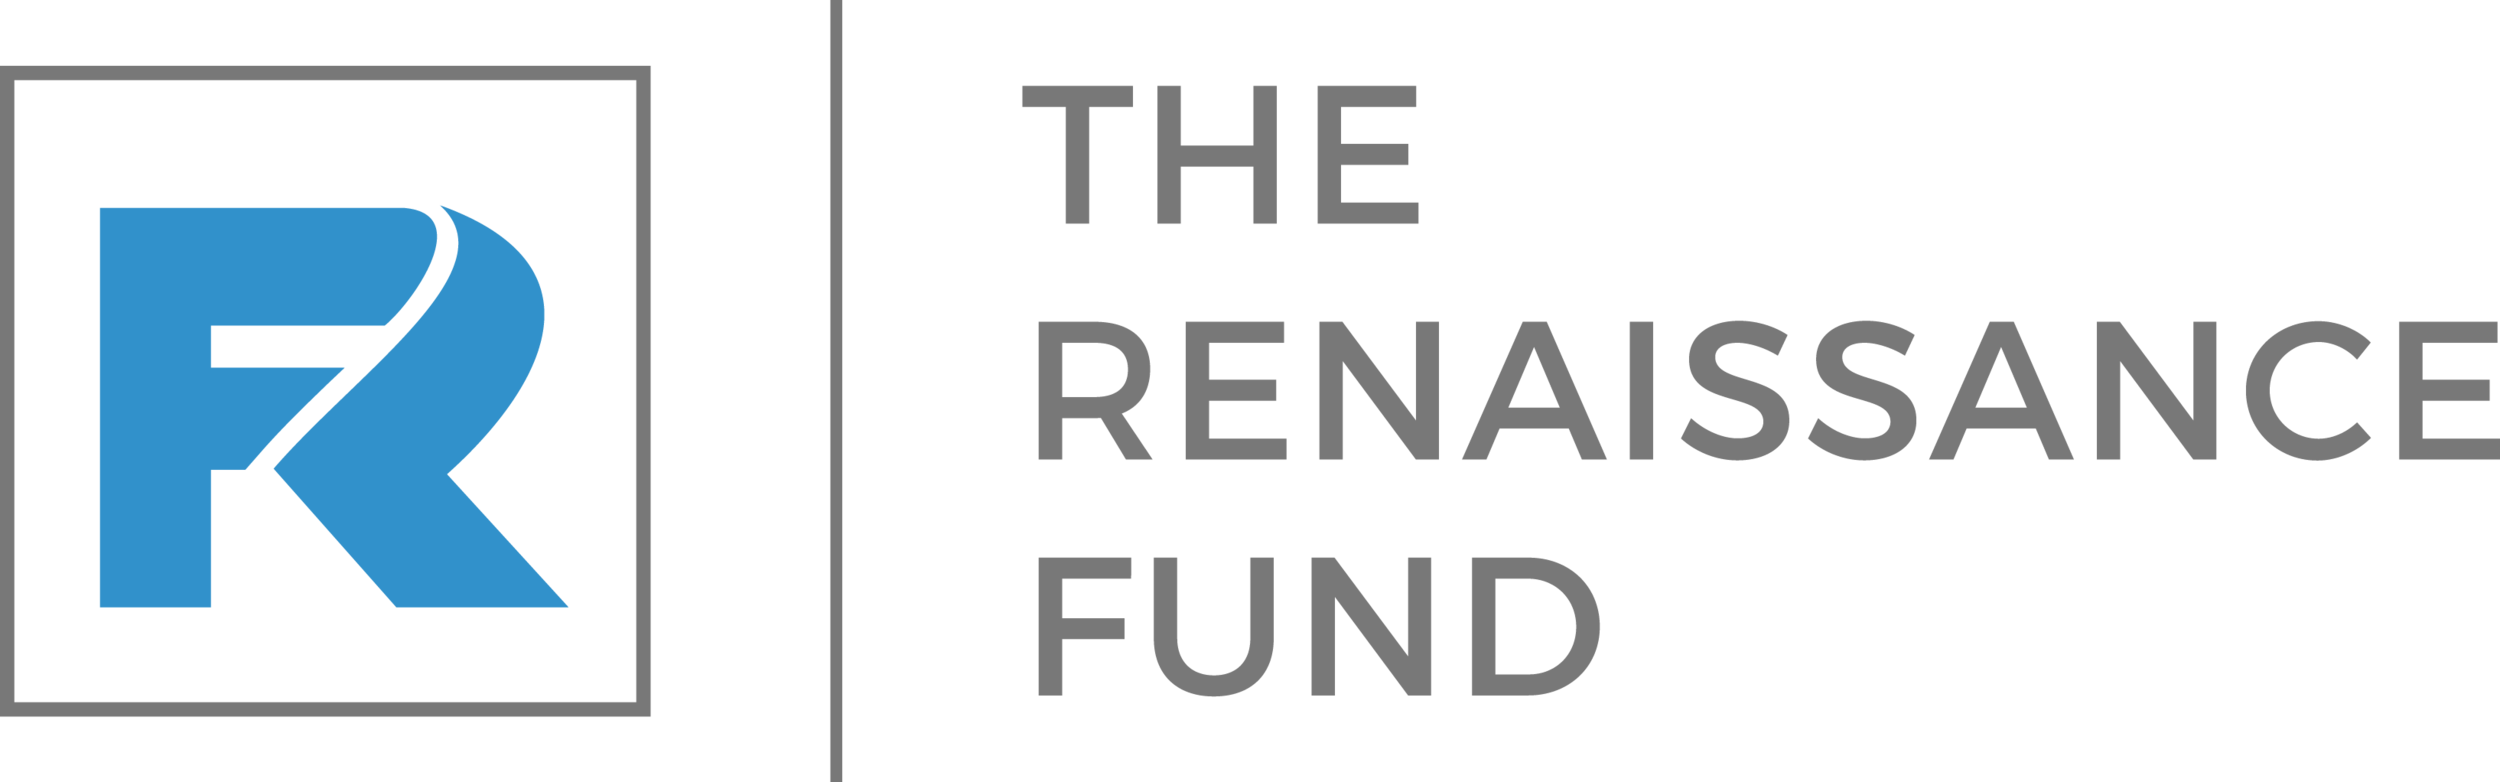 The Renaissance Fund, NFP